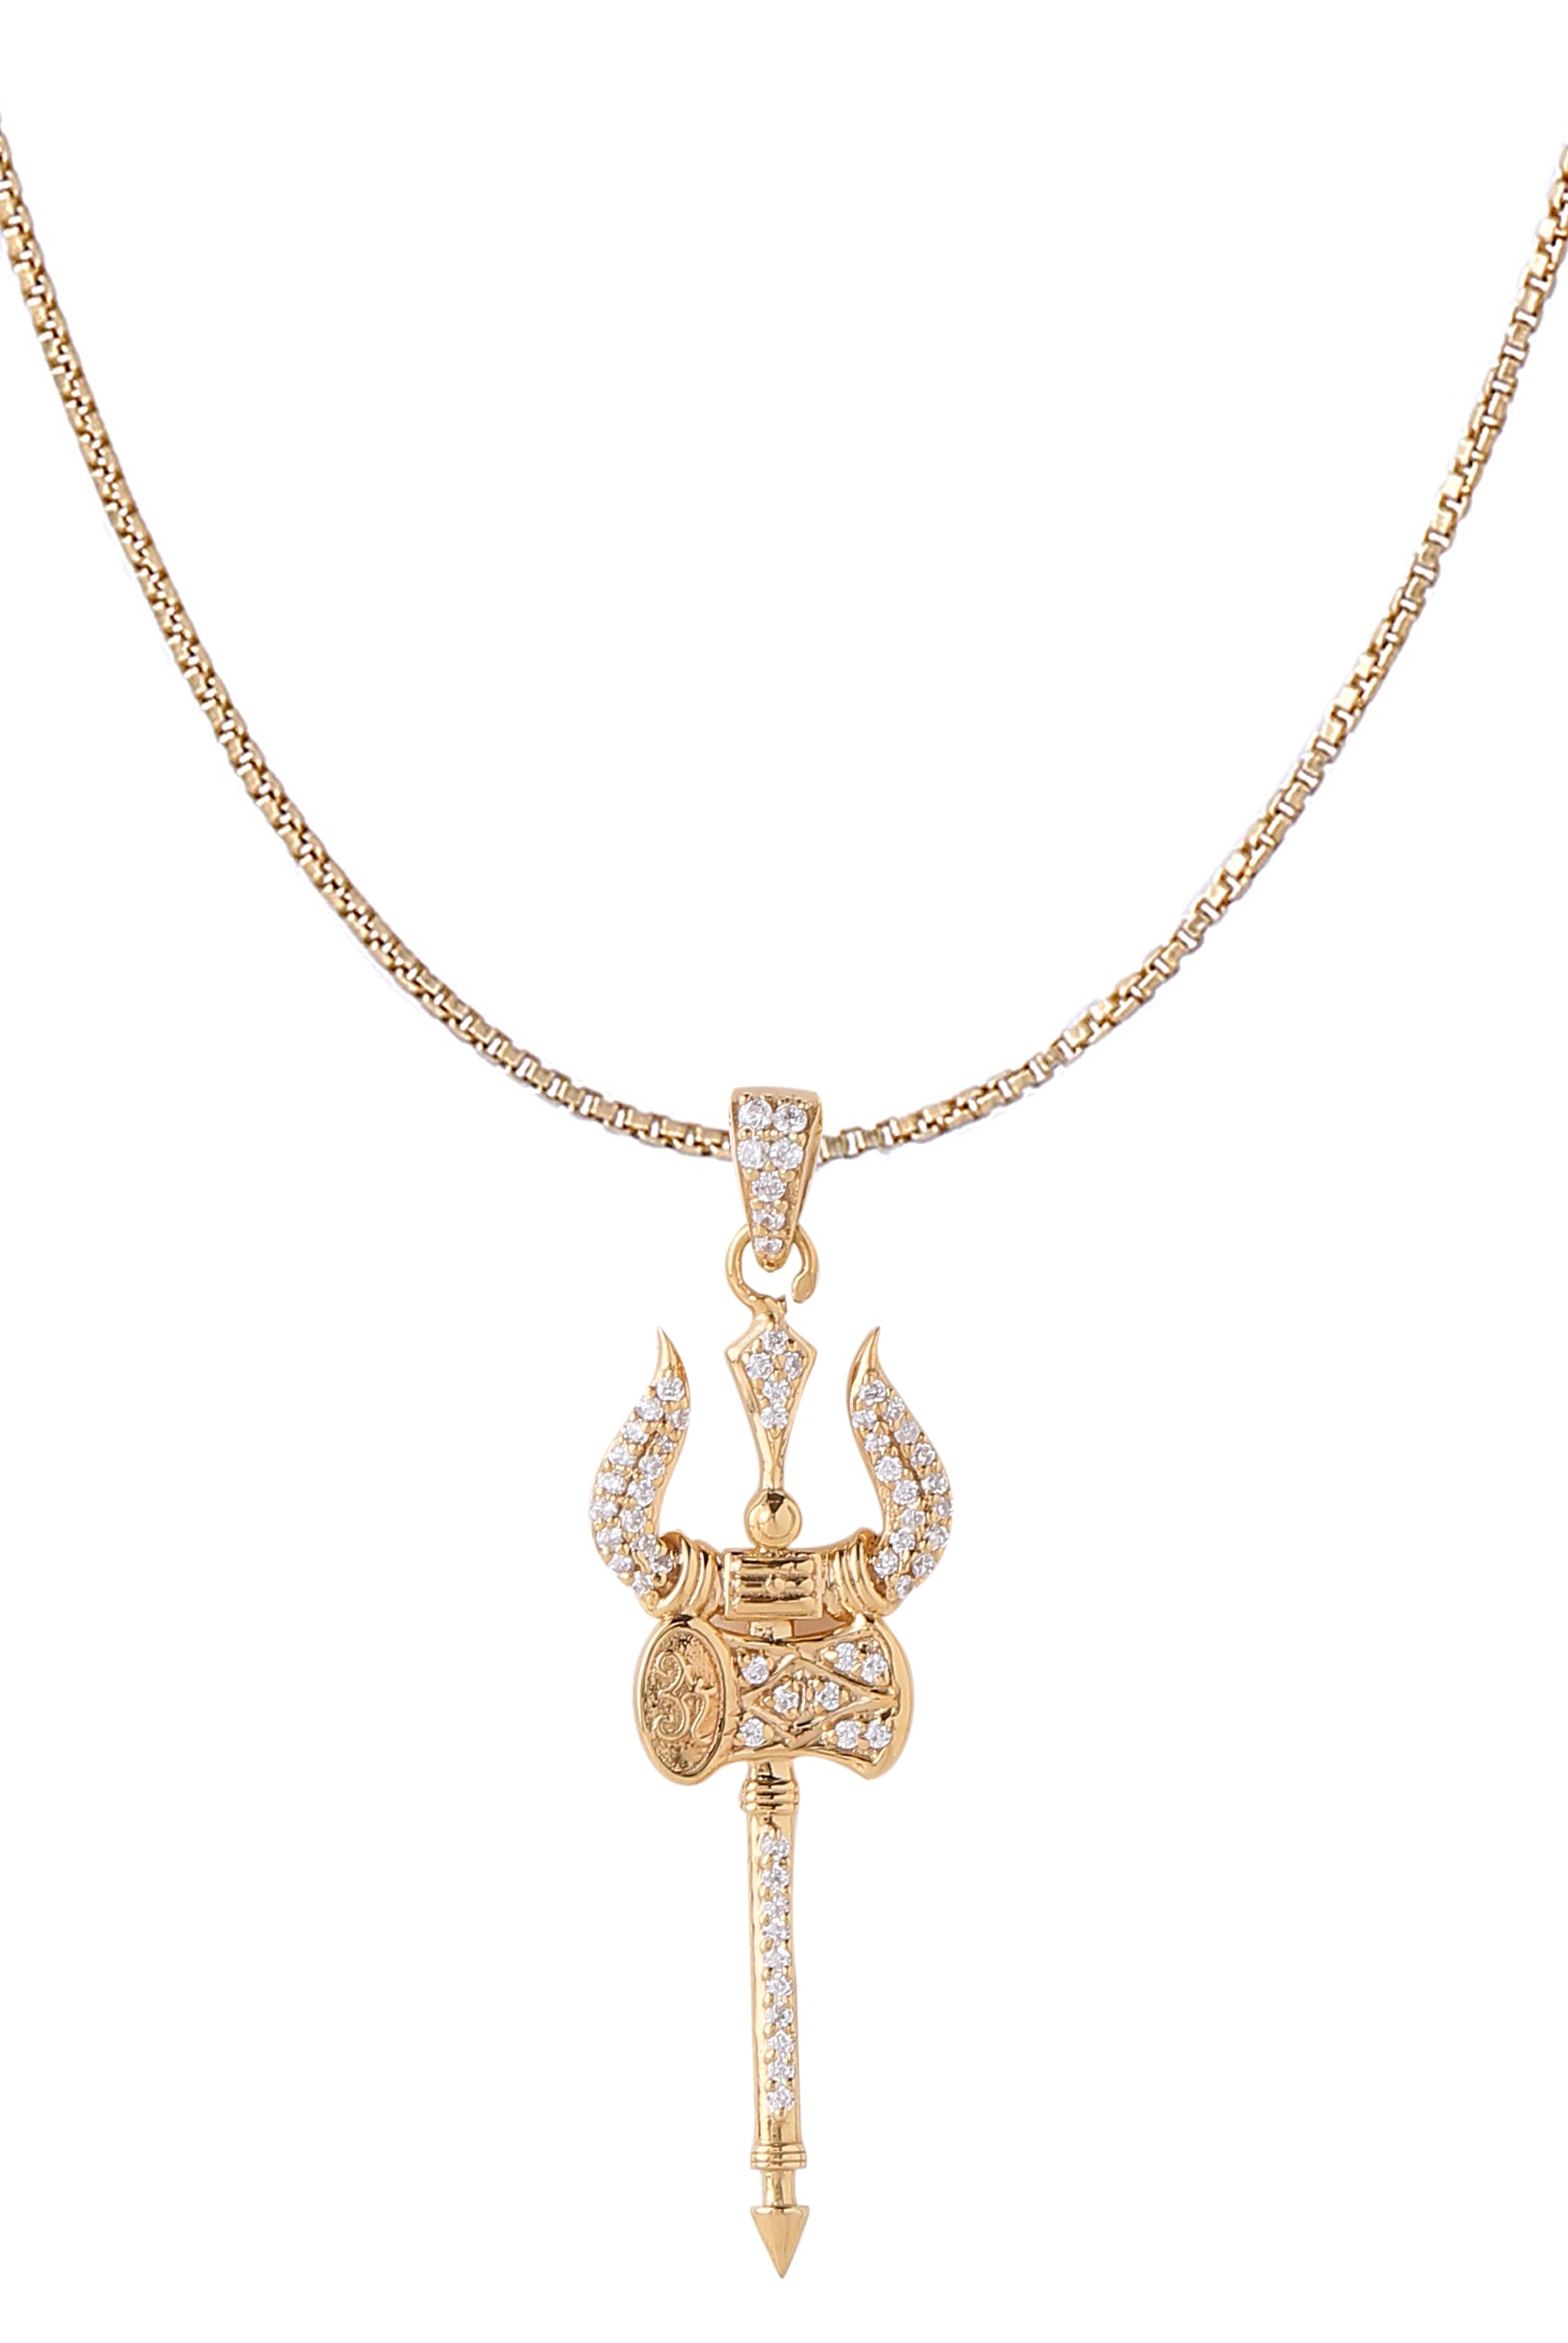 Gold Color Trishul Pendant Made of 925 Sterling Silver Material with 20 Inch Long Silver Chain